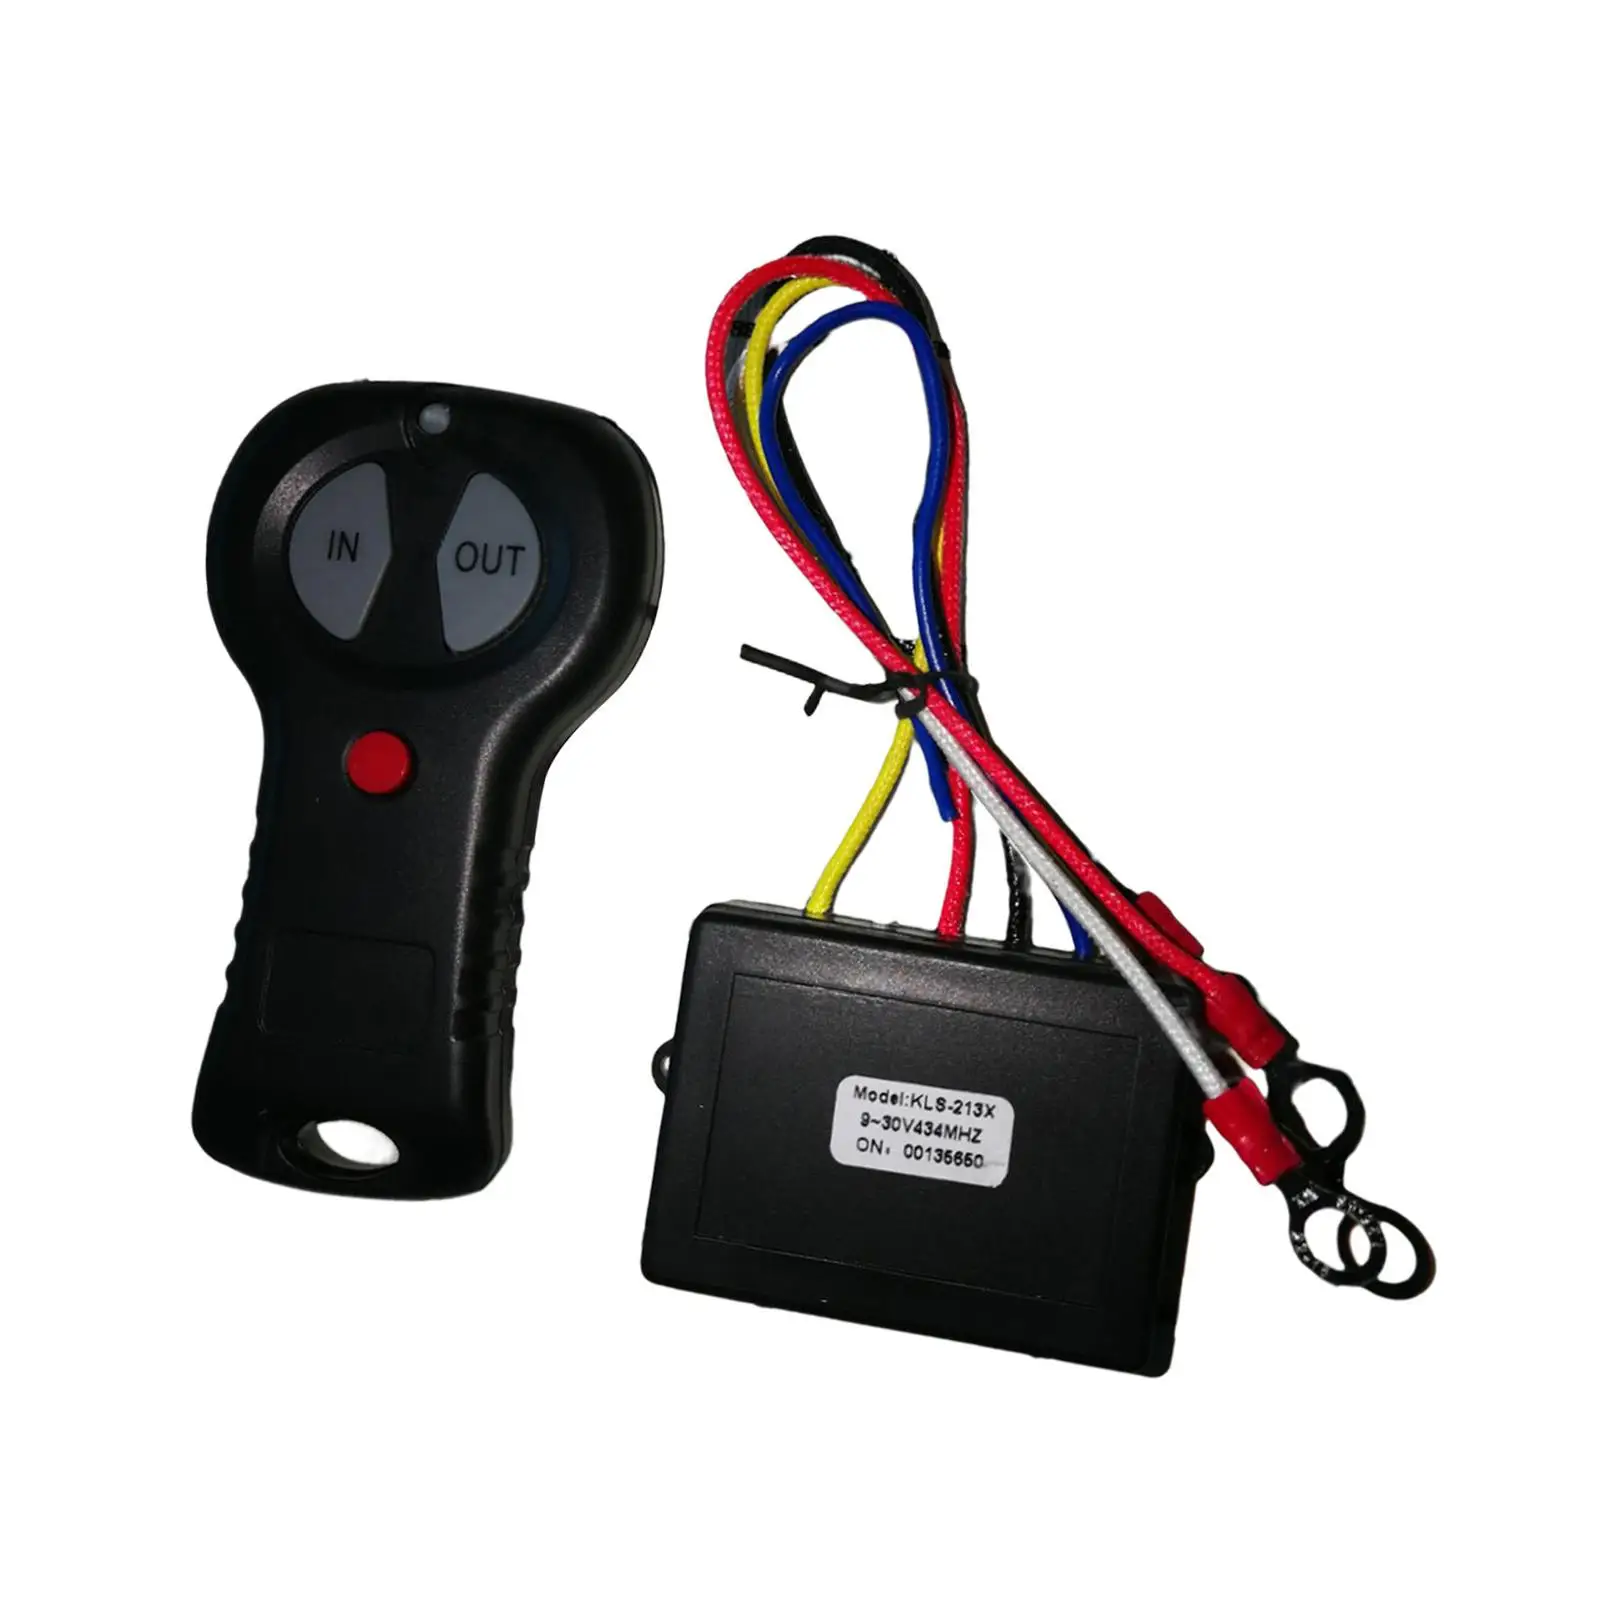 Winch Remote Control with Indicator Light Waterproof Easy Install Car Truck Winch Control Universal for ATV SUV car trucks